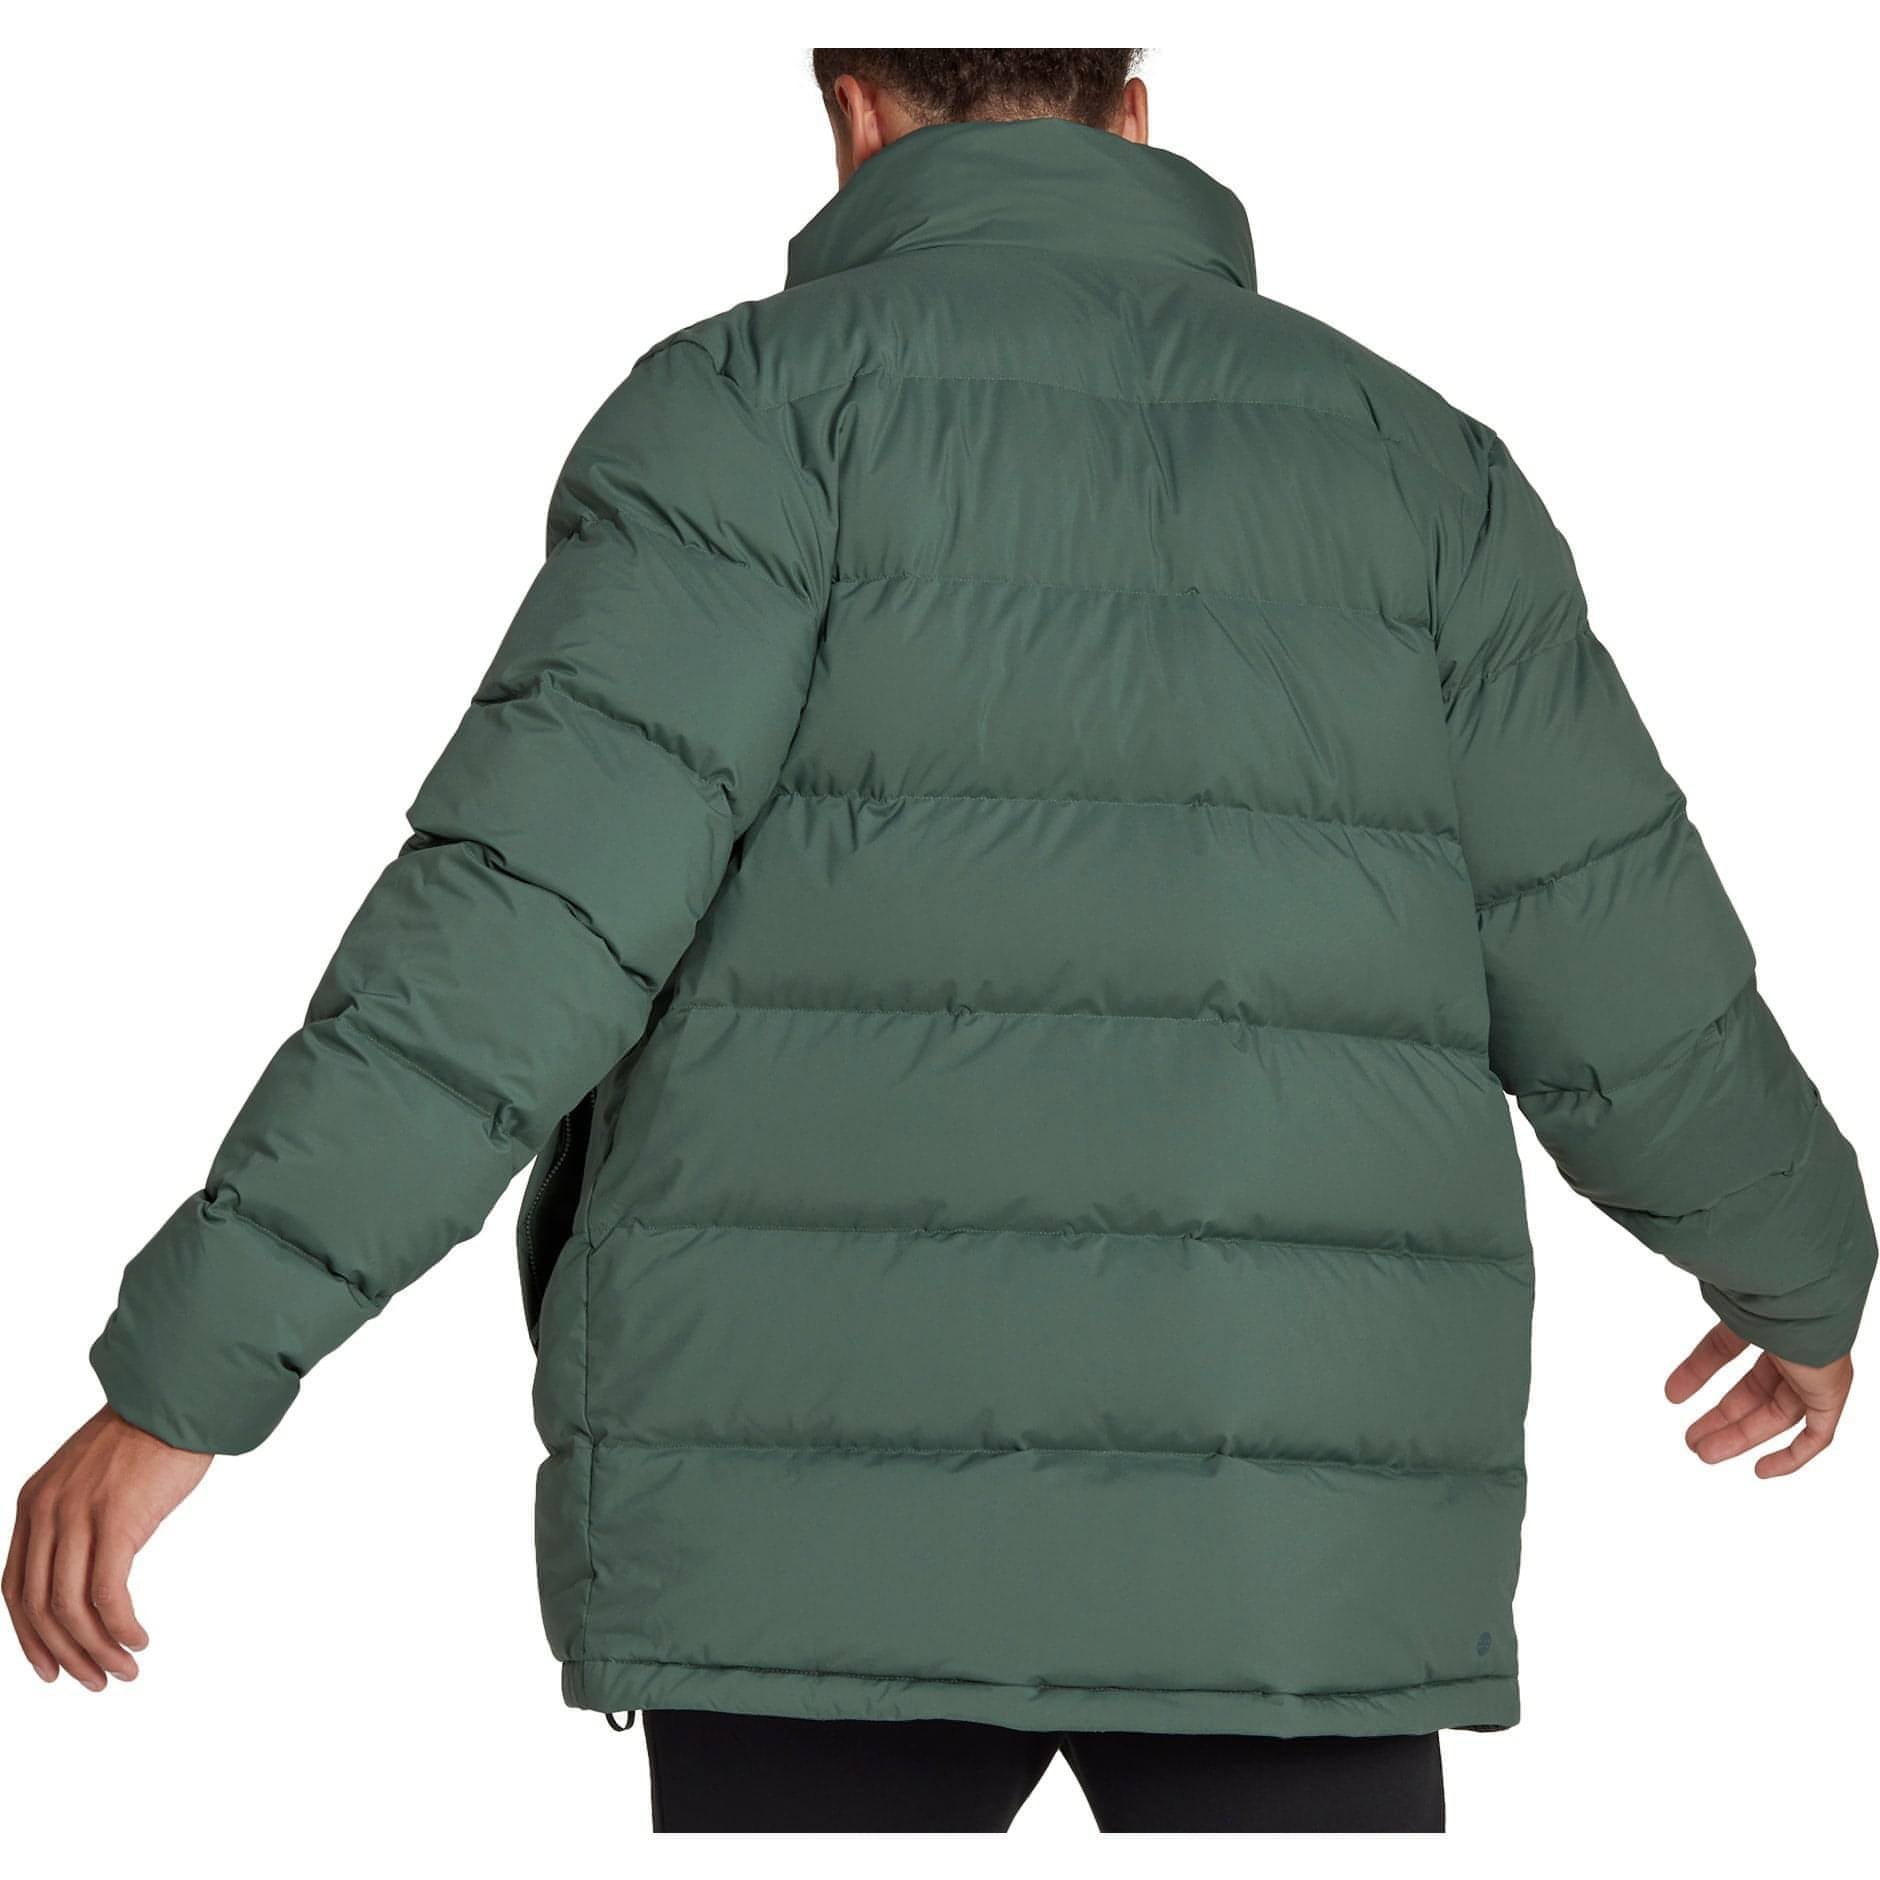 Adidas Helionic Mid Length Down Jacket Hg6282 Back View